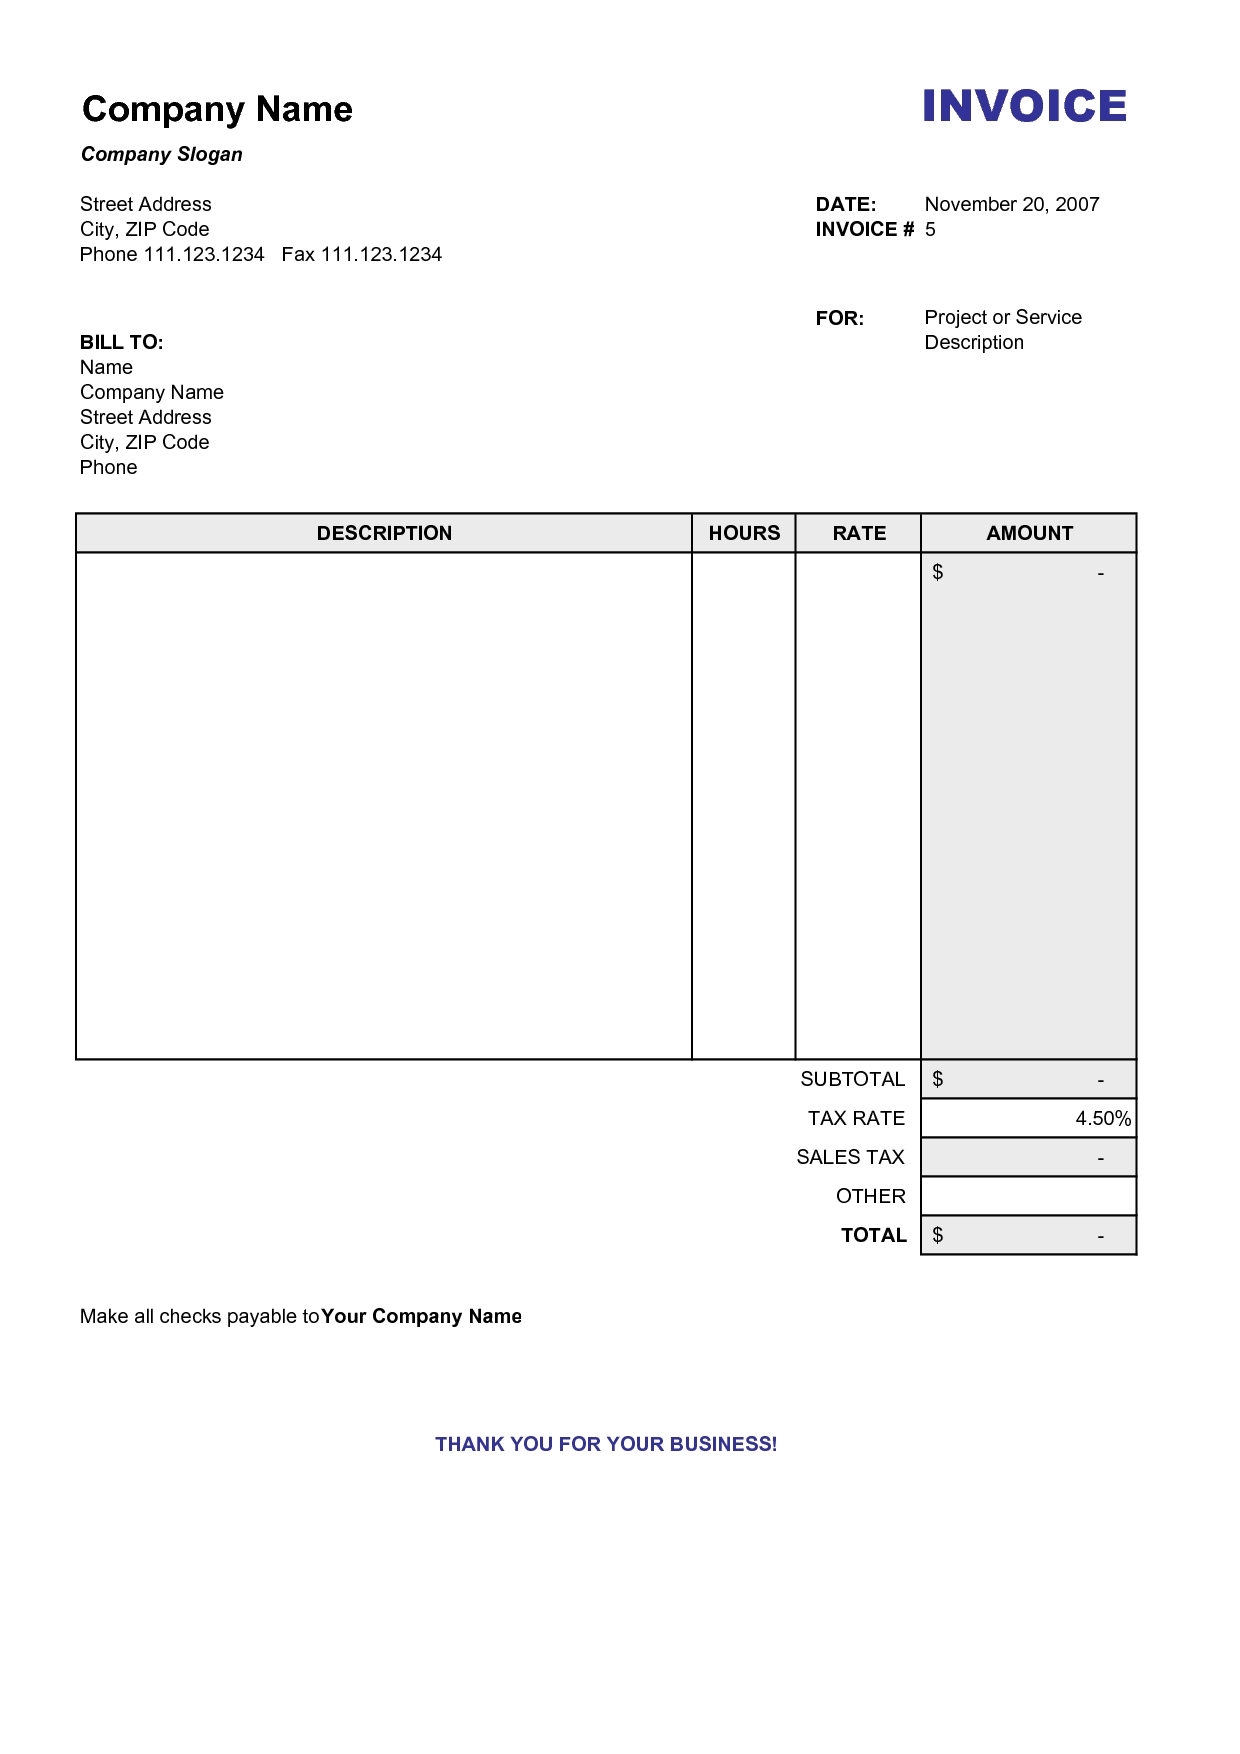 blank invoice excel residers blank invoice excel